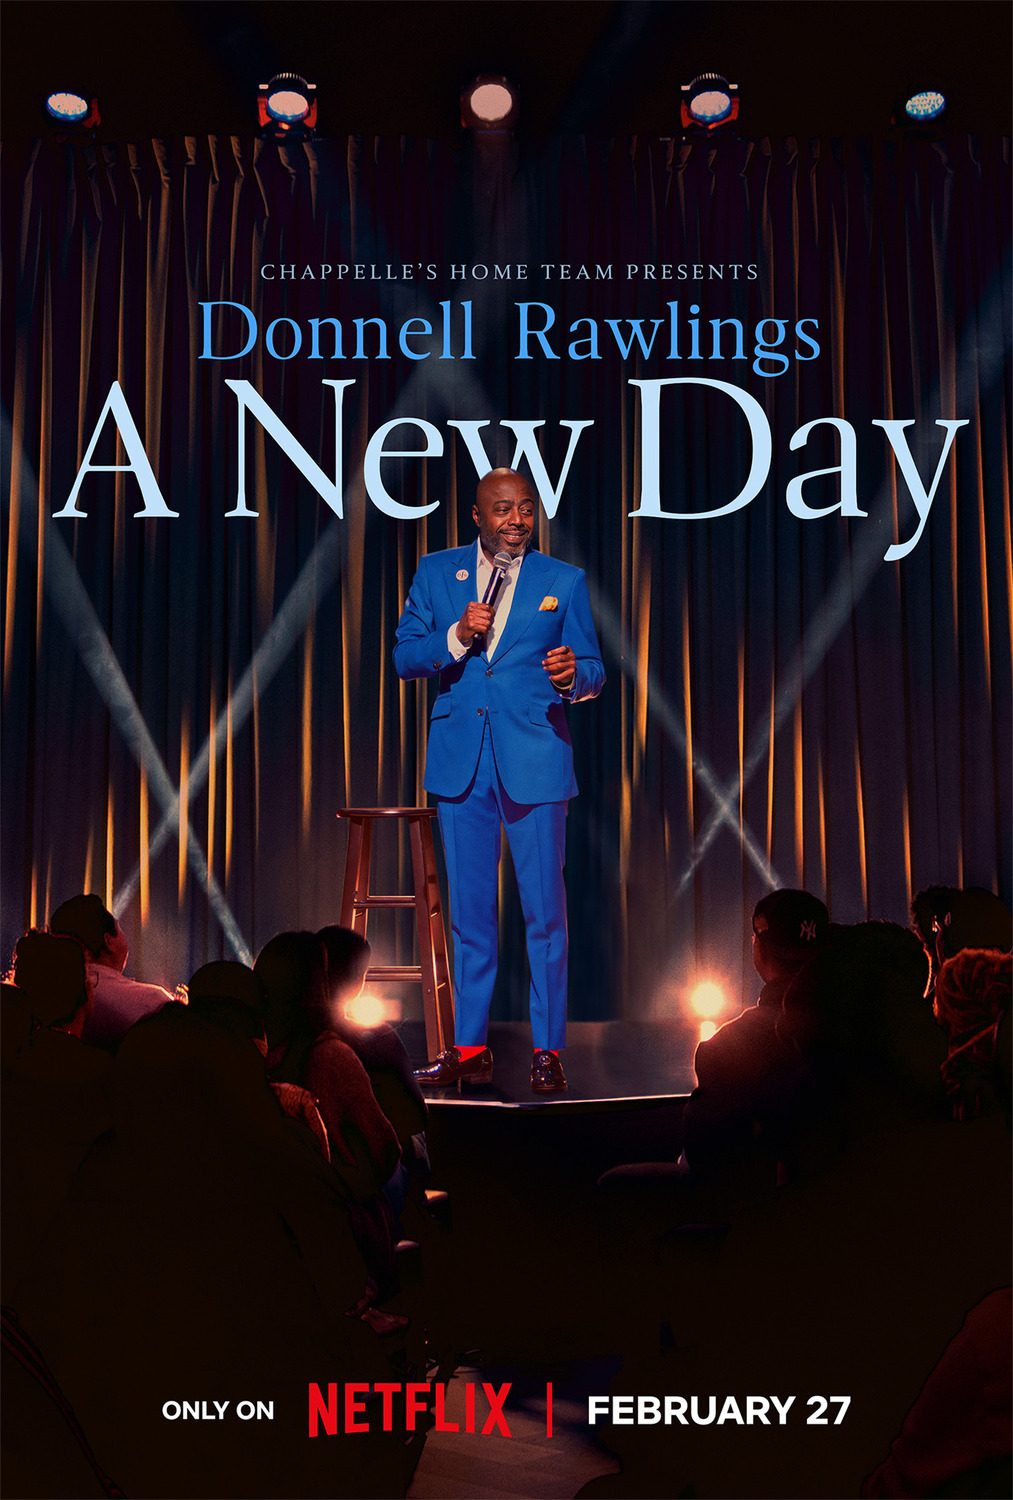 Extra Large TV Poster Image for Chappelle's Home Team - Donnell Rawlings: A New Day 